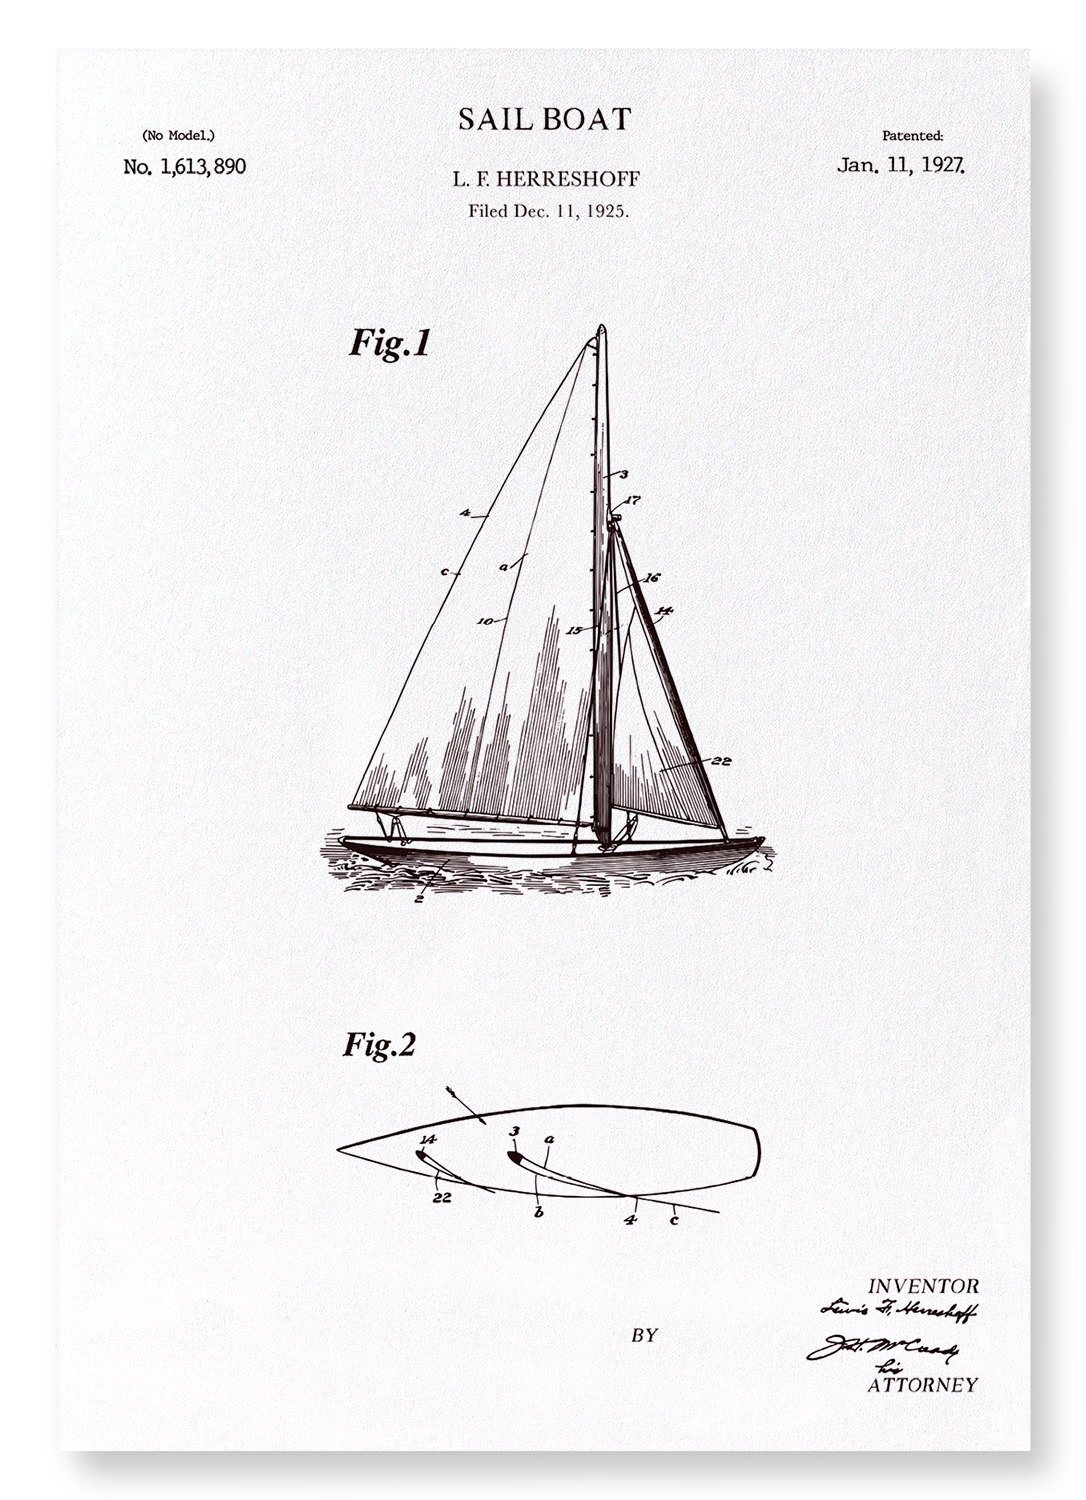 PATENT OF SAIL BOAT (1927)